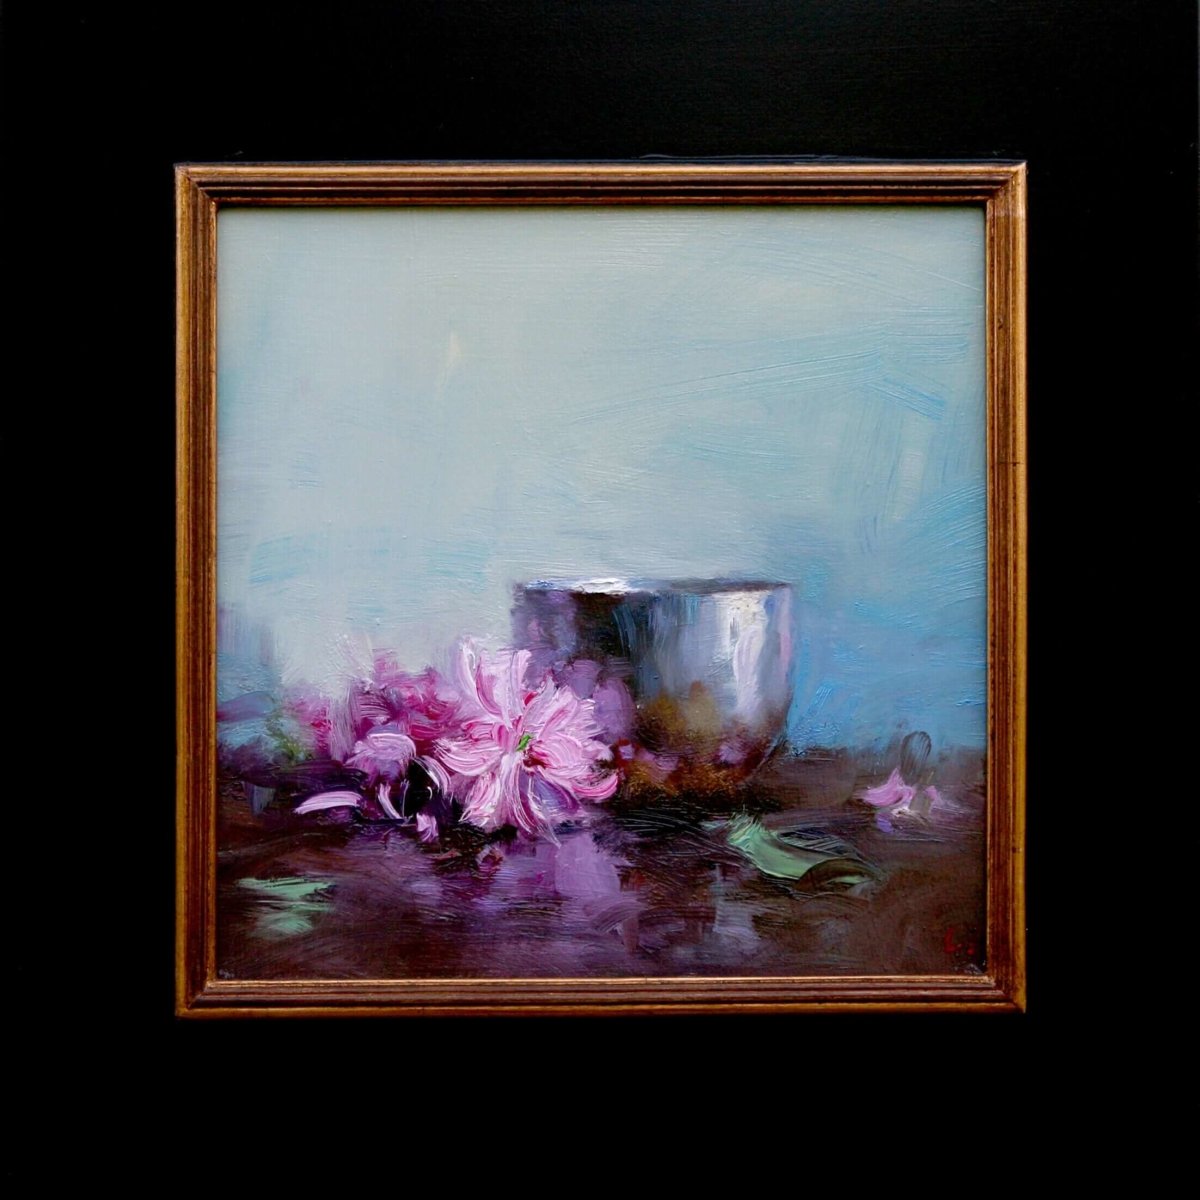 Cherry Blossoms with Silver Cup by Ning Lee at LePrince Galleries